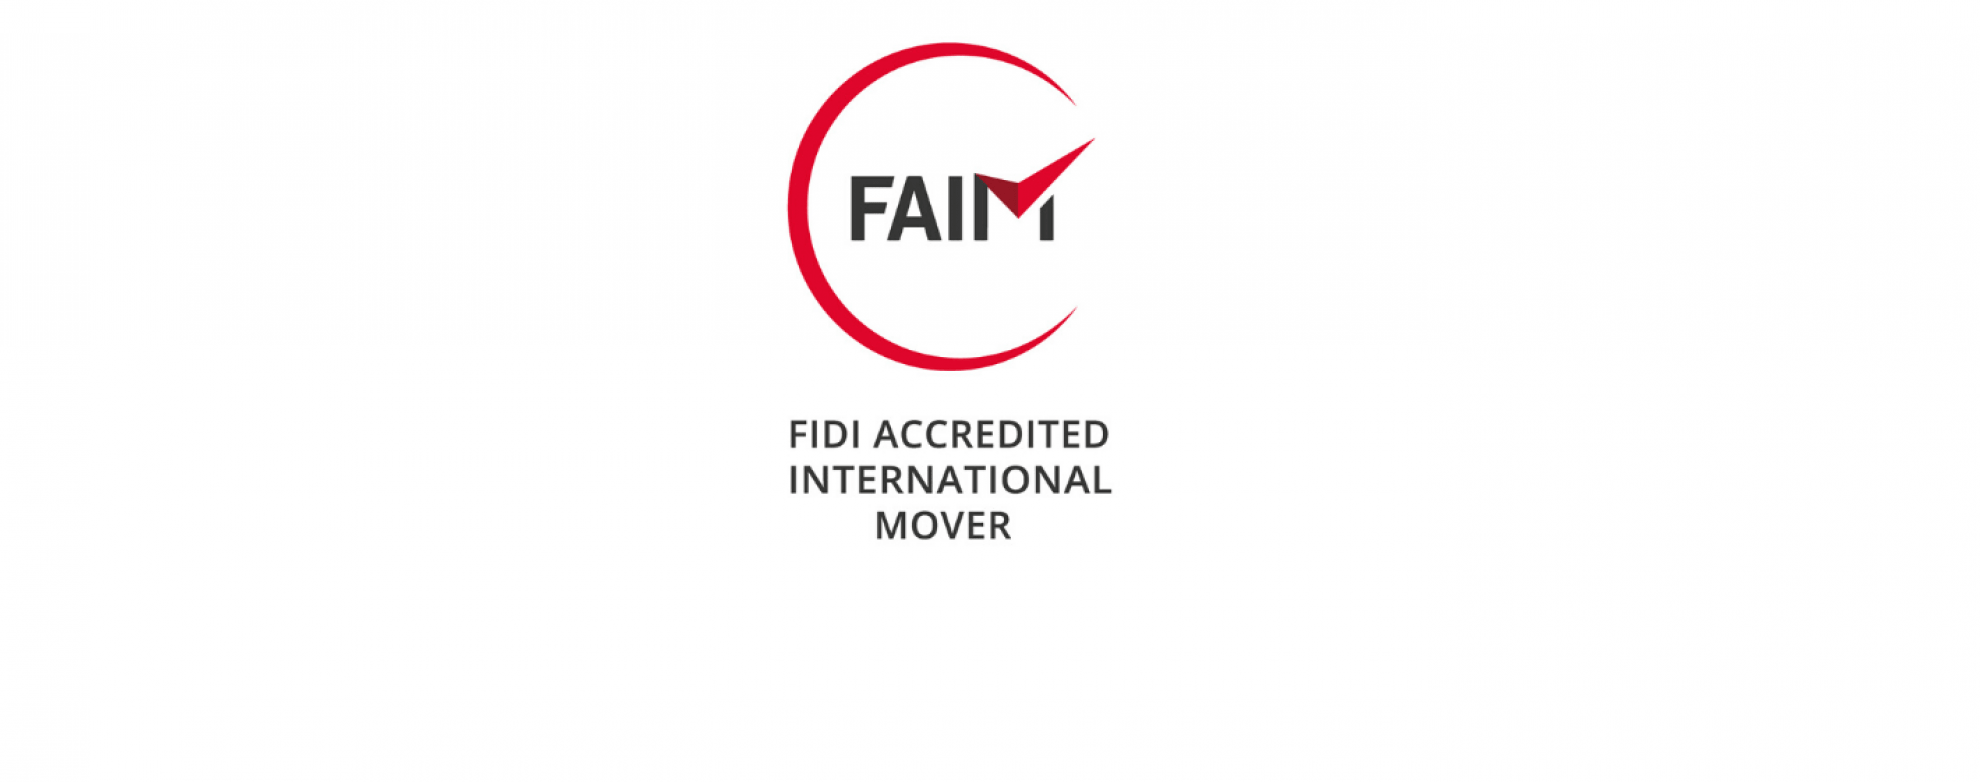 FAIM 2022: new Standard applicable as of January 2023